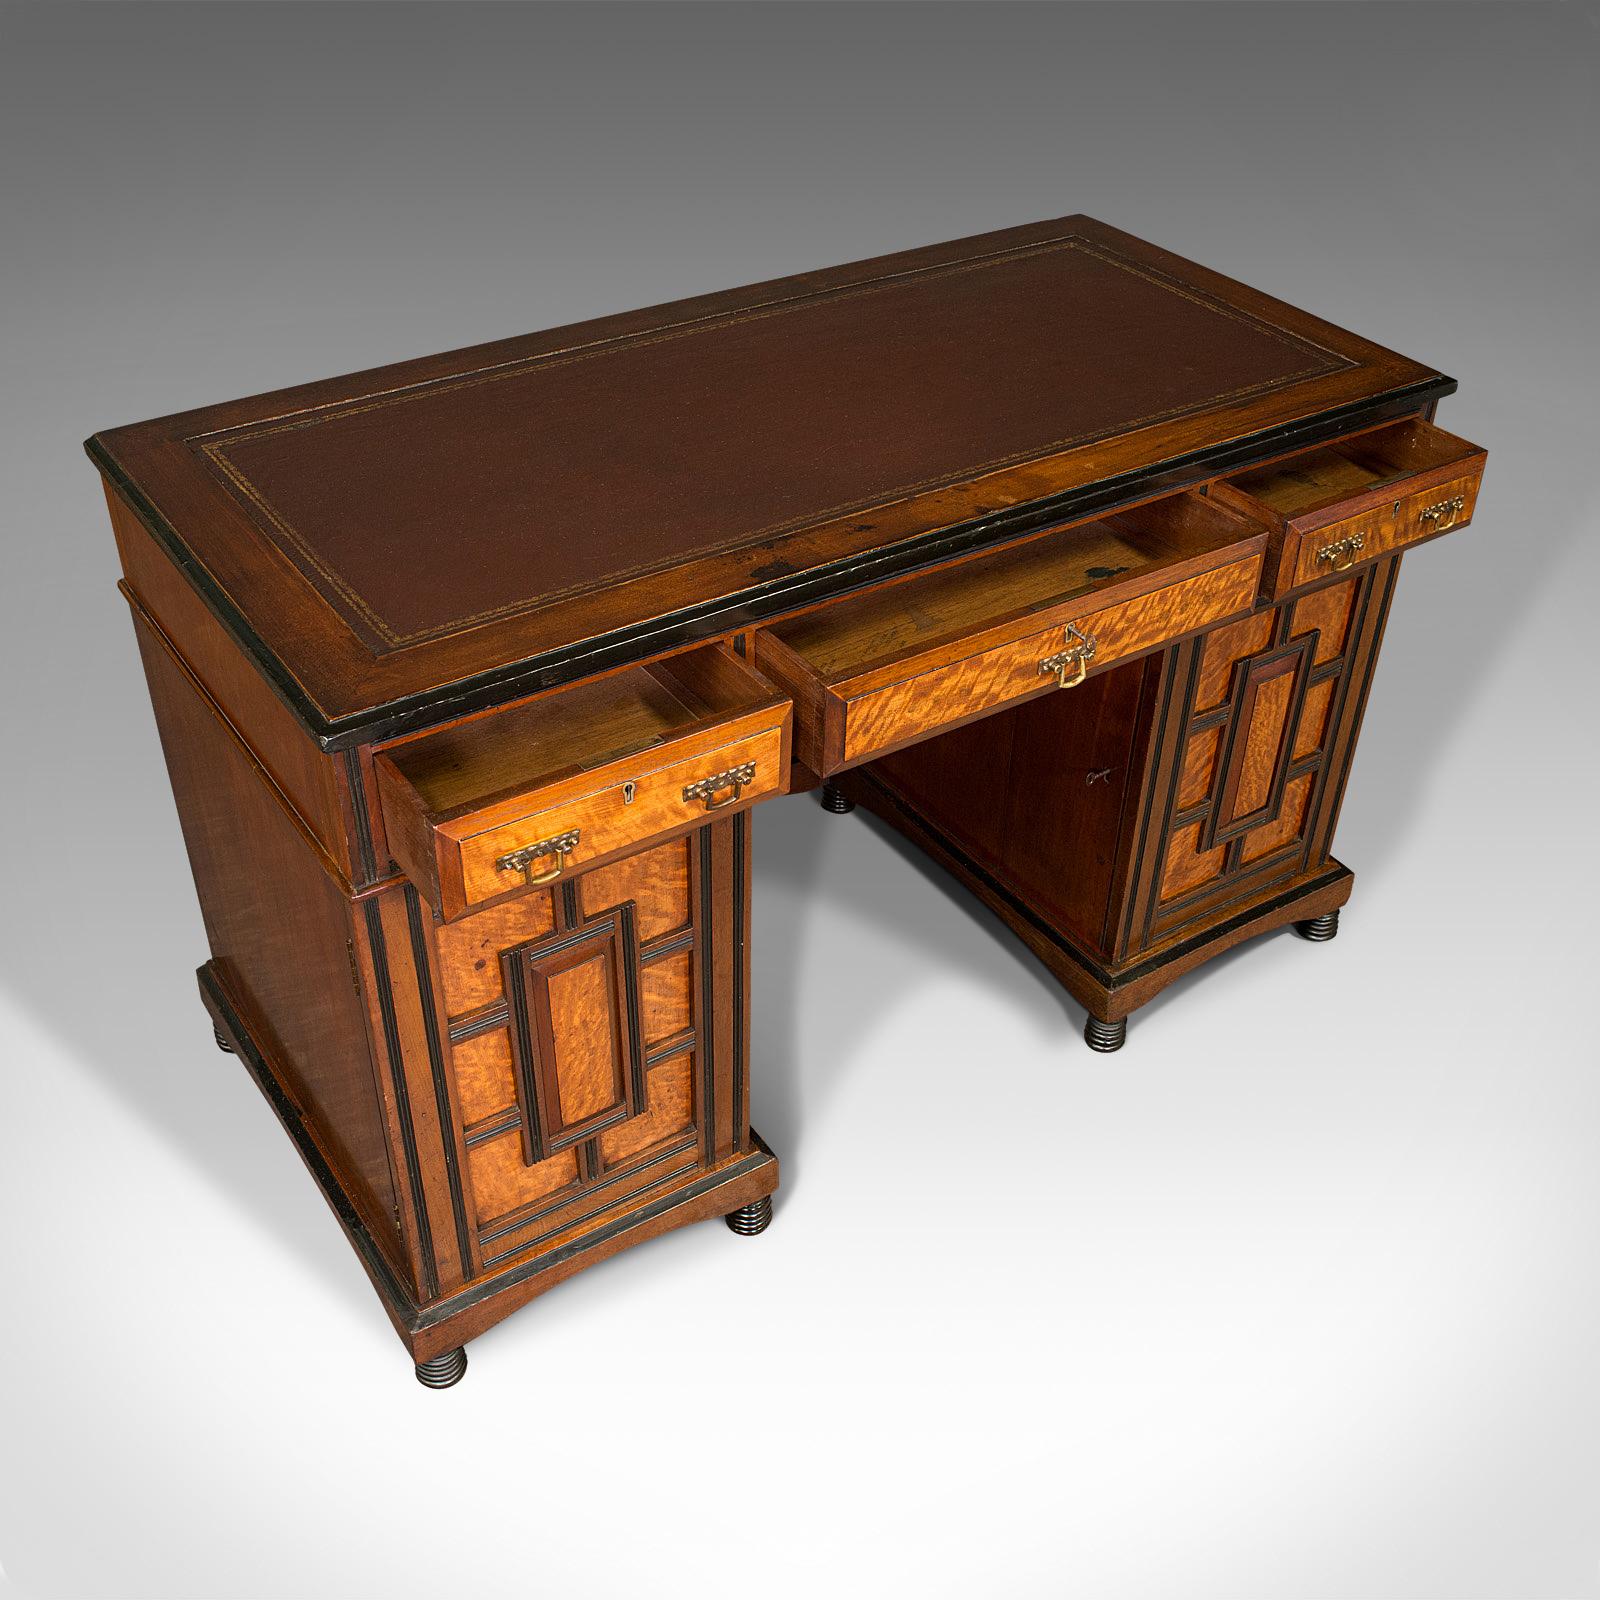 Antique Ladies Morning Room Desk, English, Writing Table, Aesthetic Period, 1880 For Sale 1